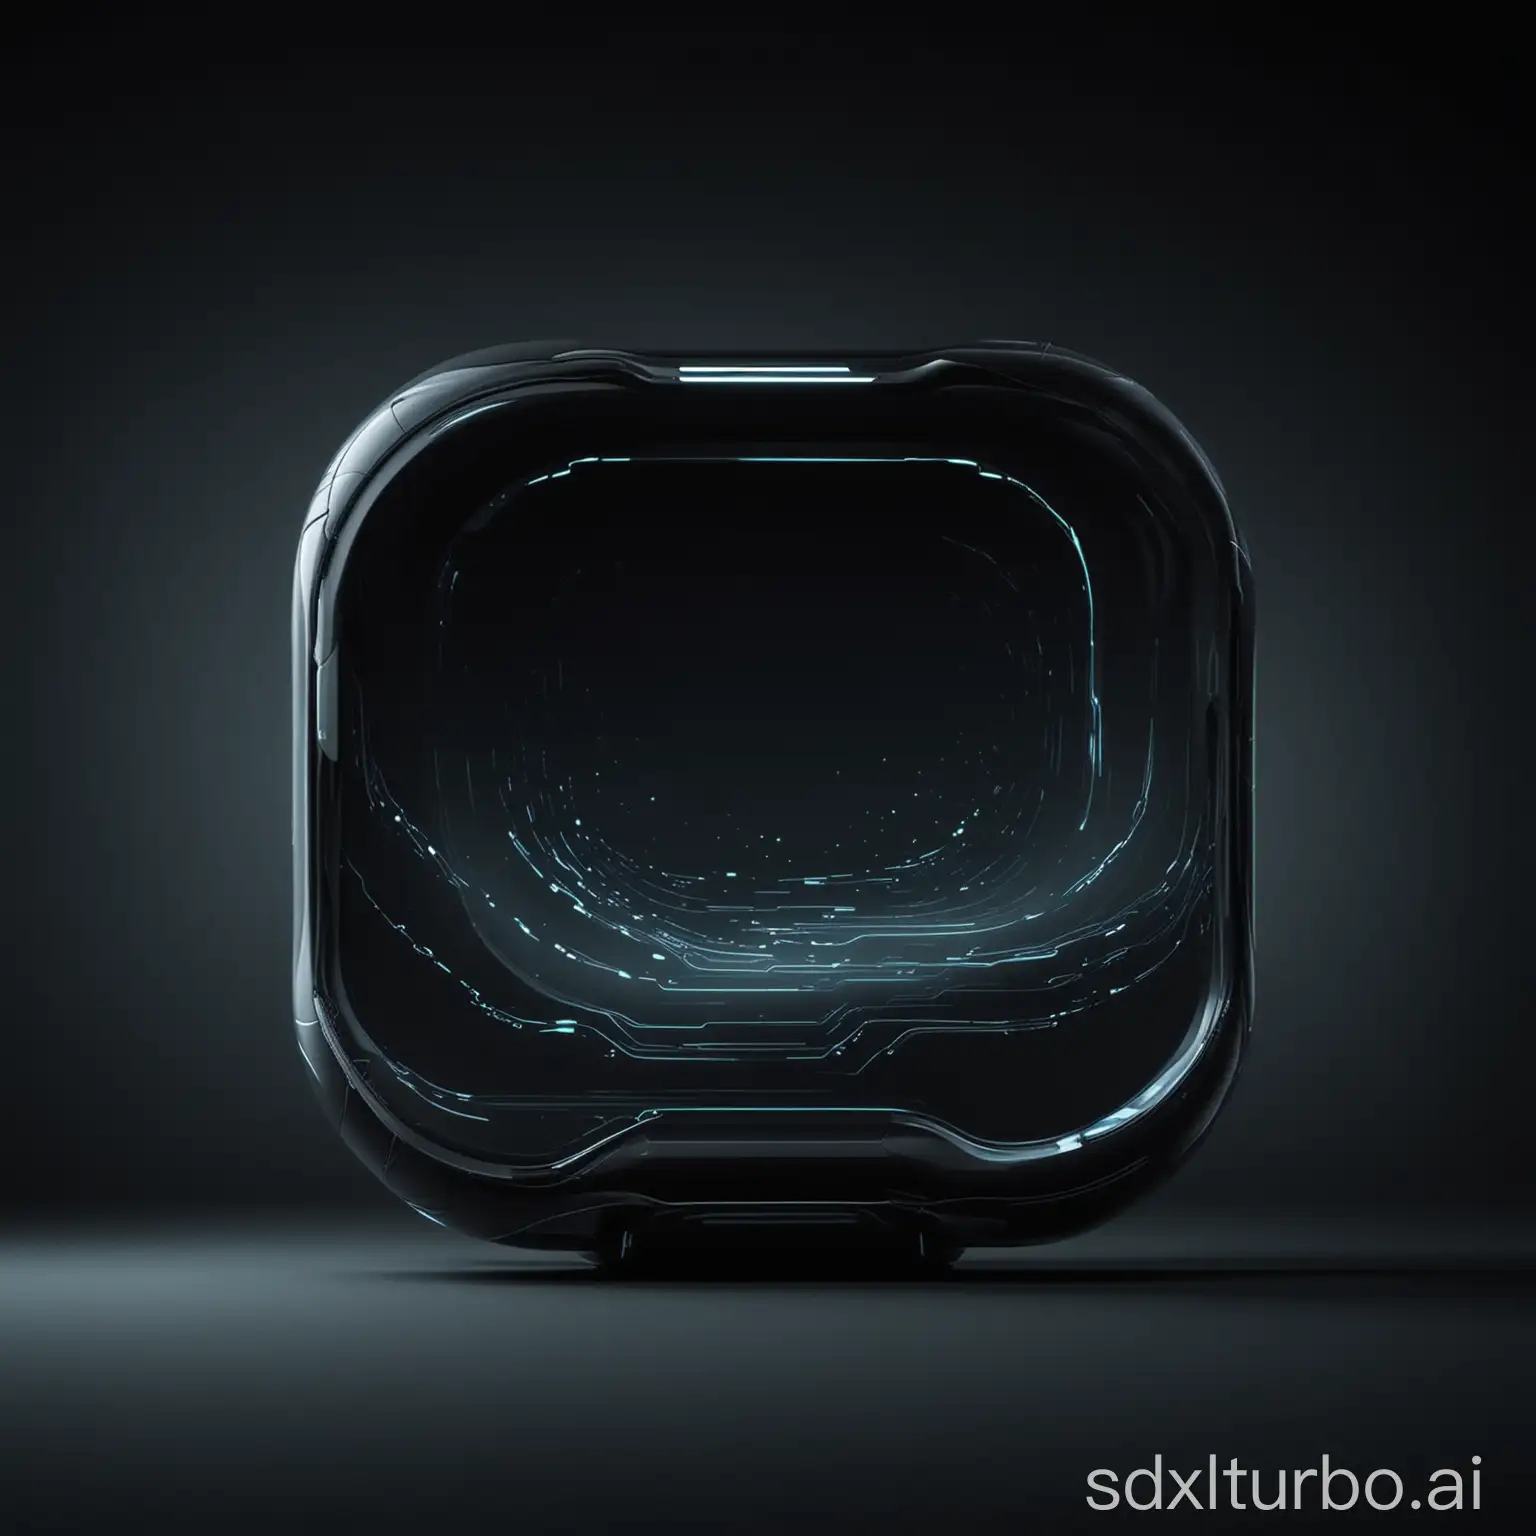 Futuristic-Dark-Background-for-Website-Product-Page